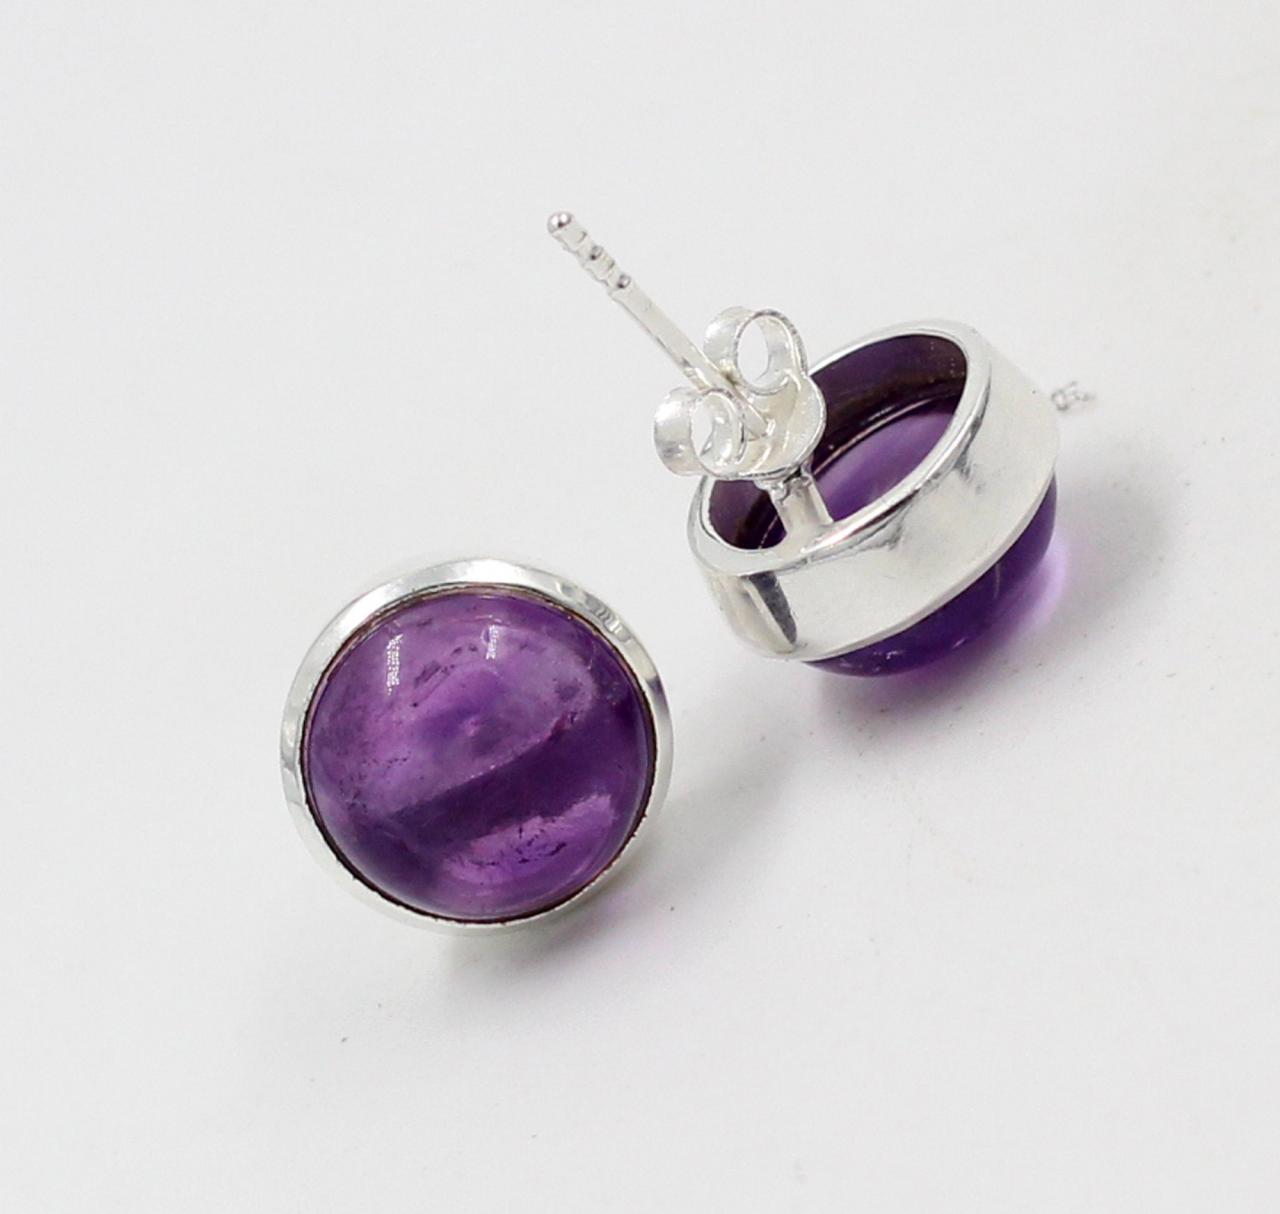 Beautiful Amethyst Cabochon Stud Earring,solid 925 Sterling Silver Jewelry,purple Amethyst Post Stud,birthday Gift,adorable Christmas Gift.